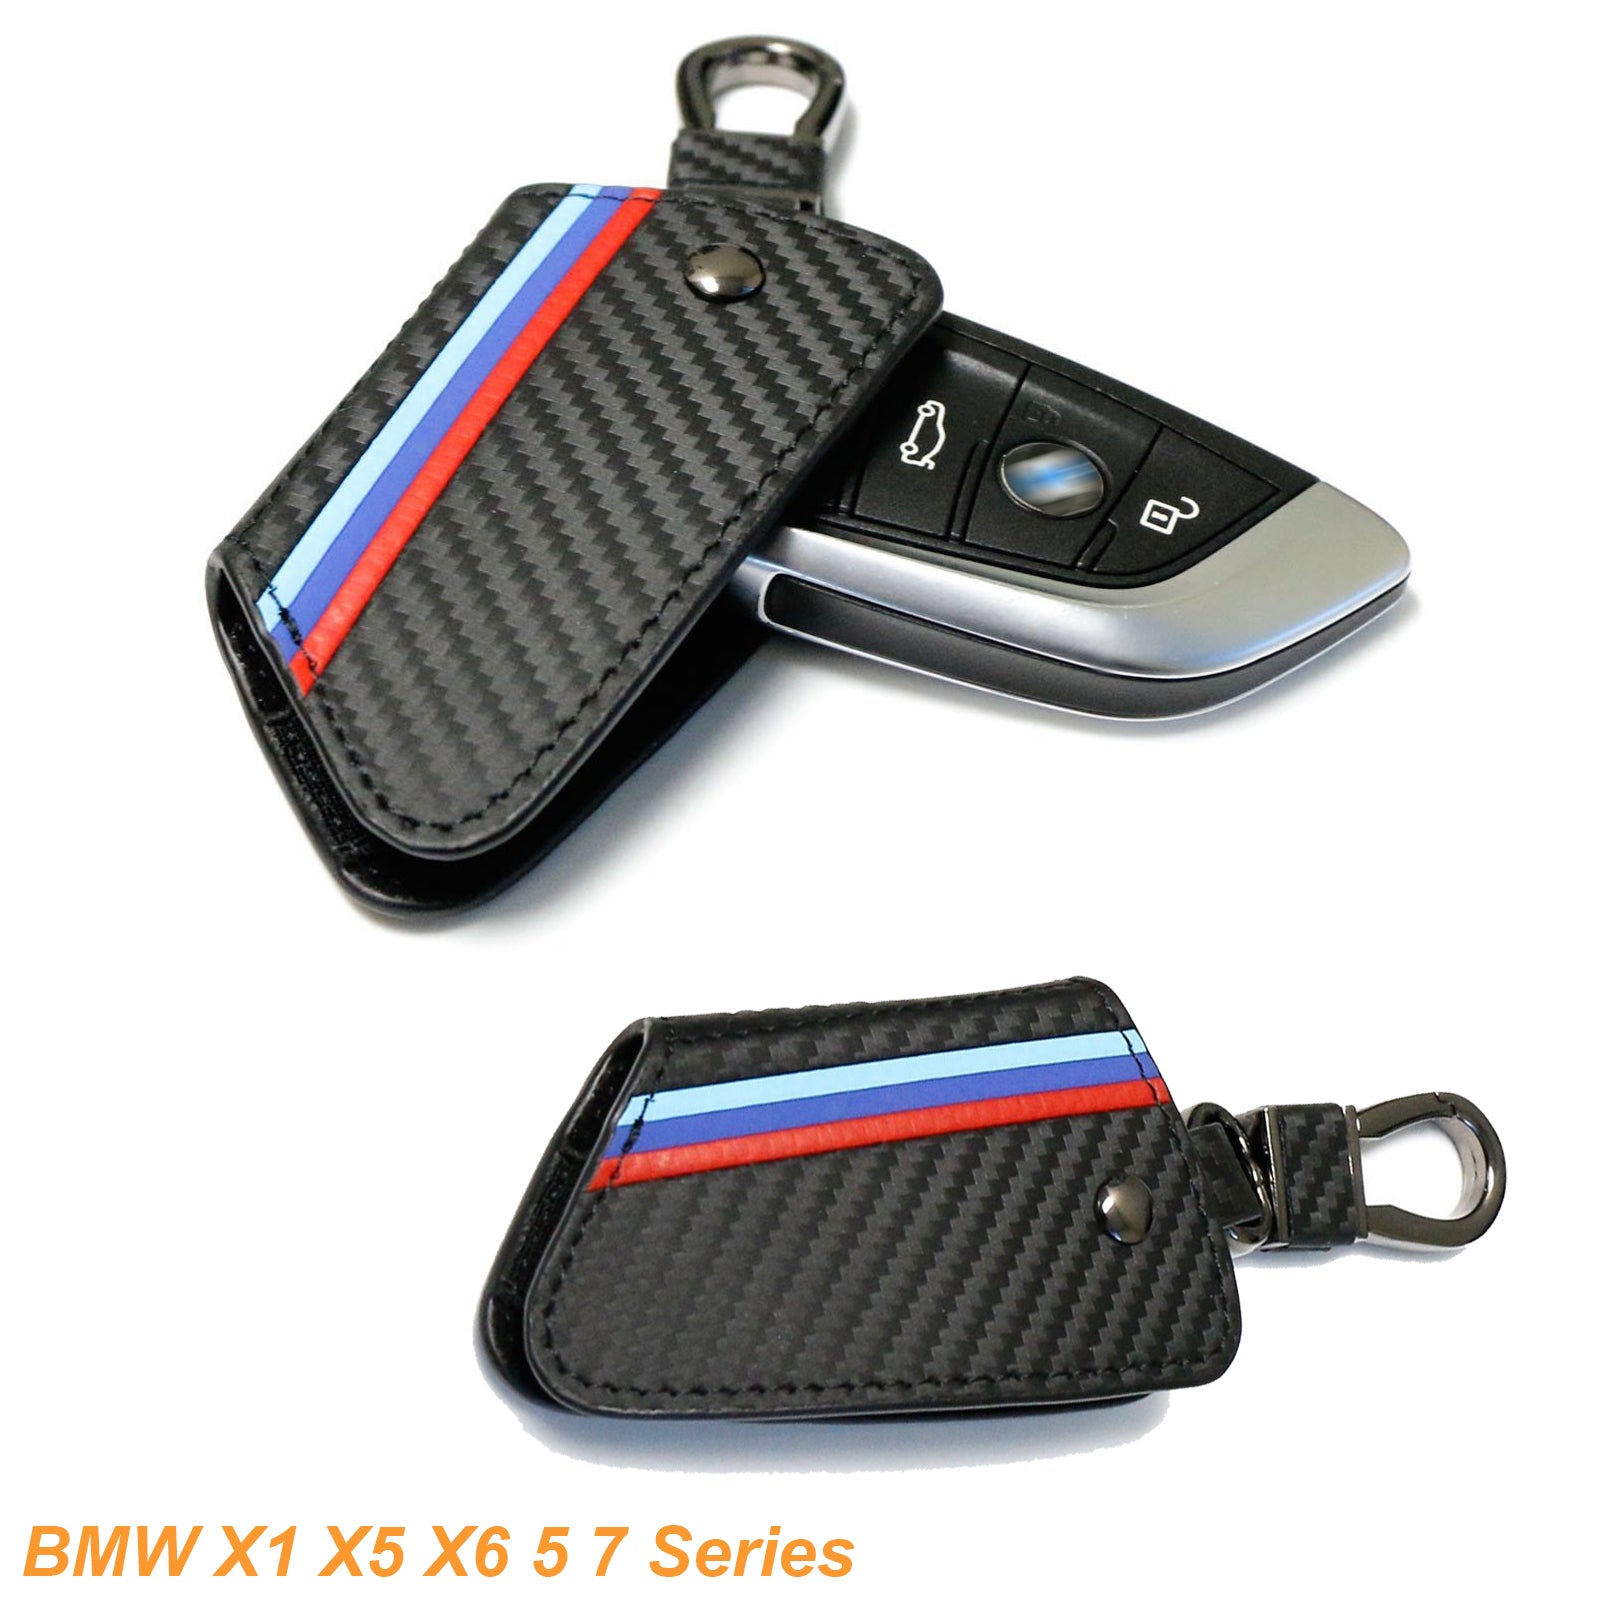  SLAKNOK Compatible with BMW Key Fob Cover with Leather Keychain,Soft  TPU Full Protection Key case Shell for X1 X2 X3 X5 X6 2 5 6 7 Series GT  etc. Smart Key